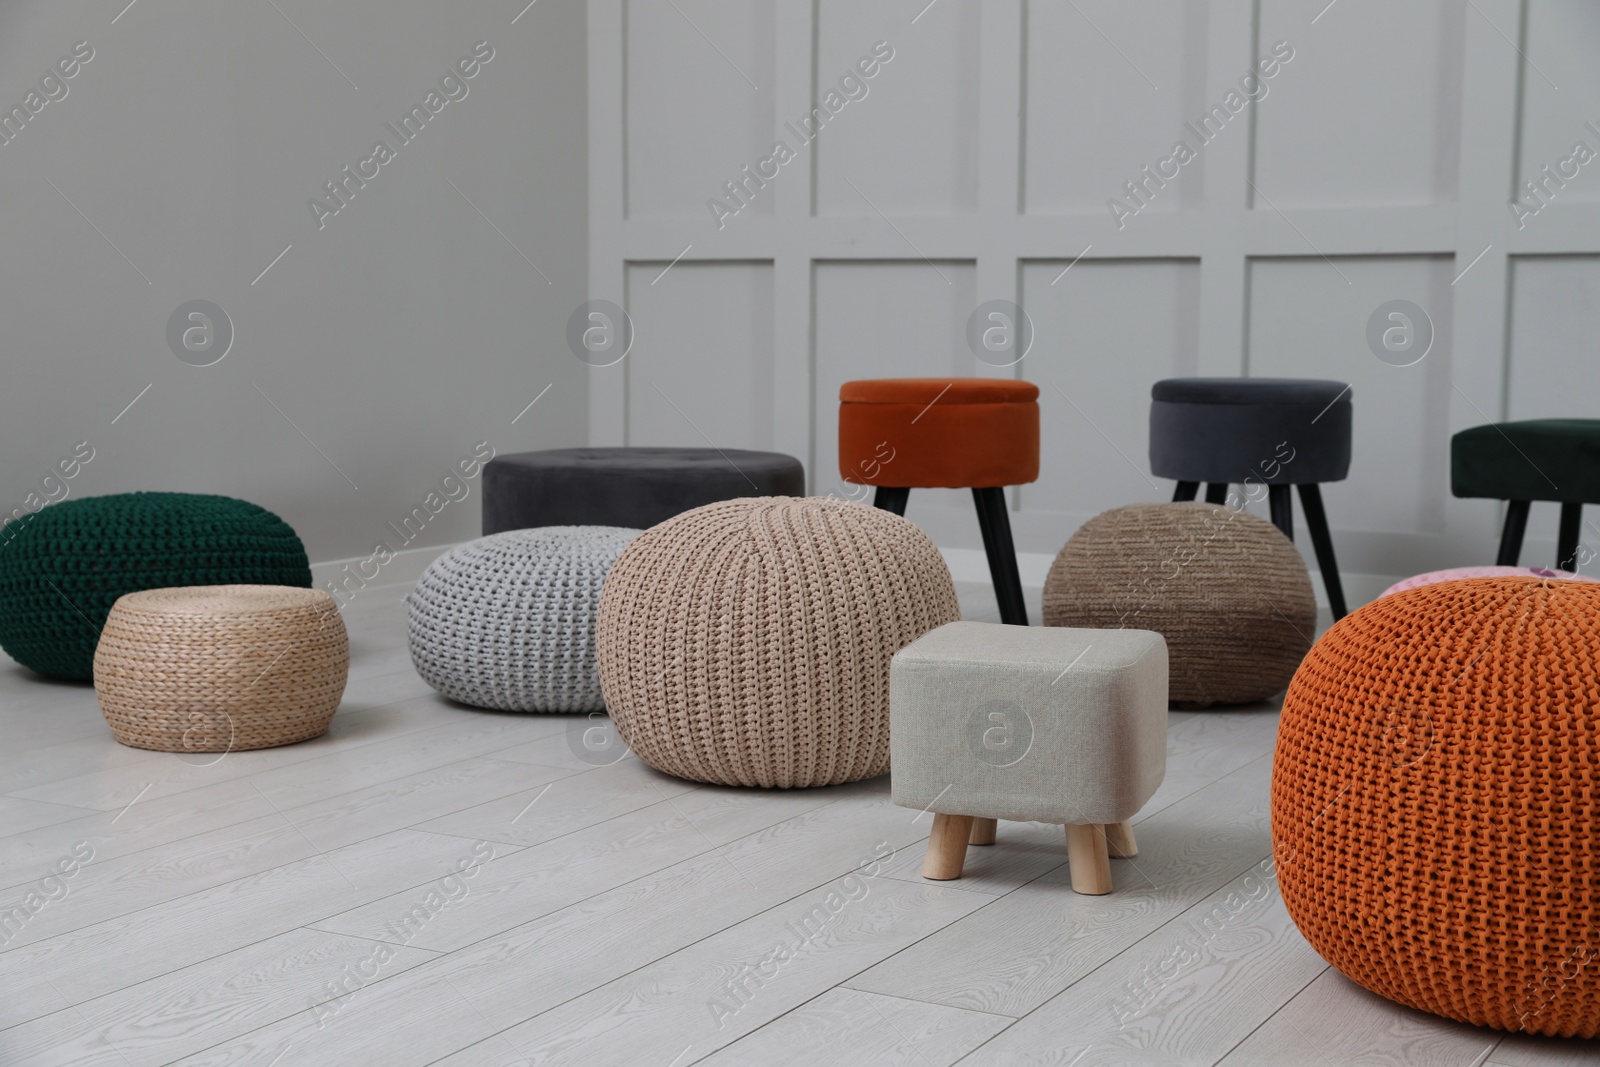 Photo of Different stylish poufs and ottomans in room